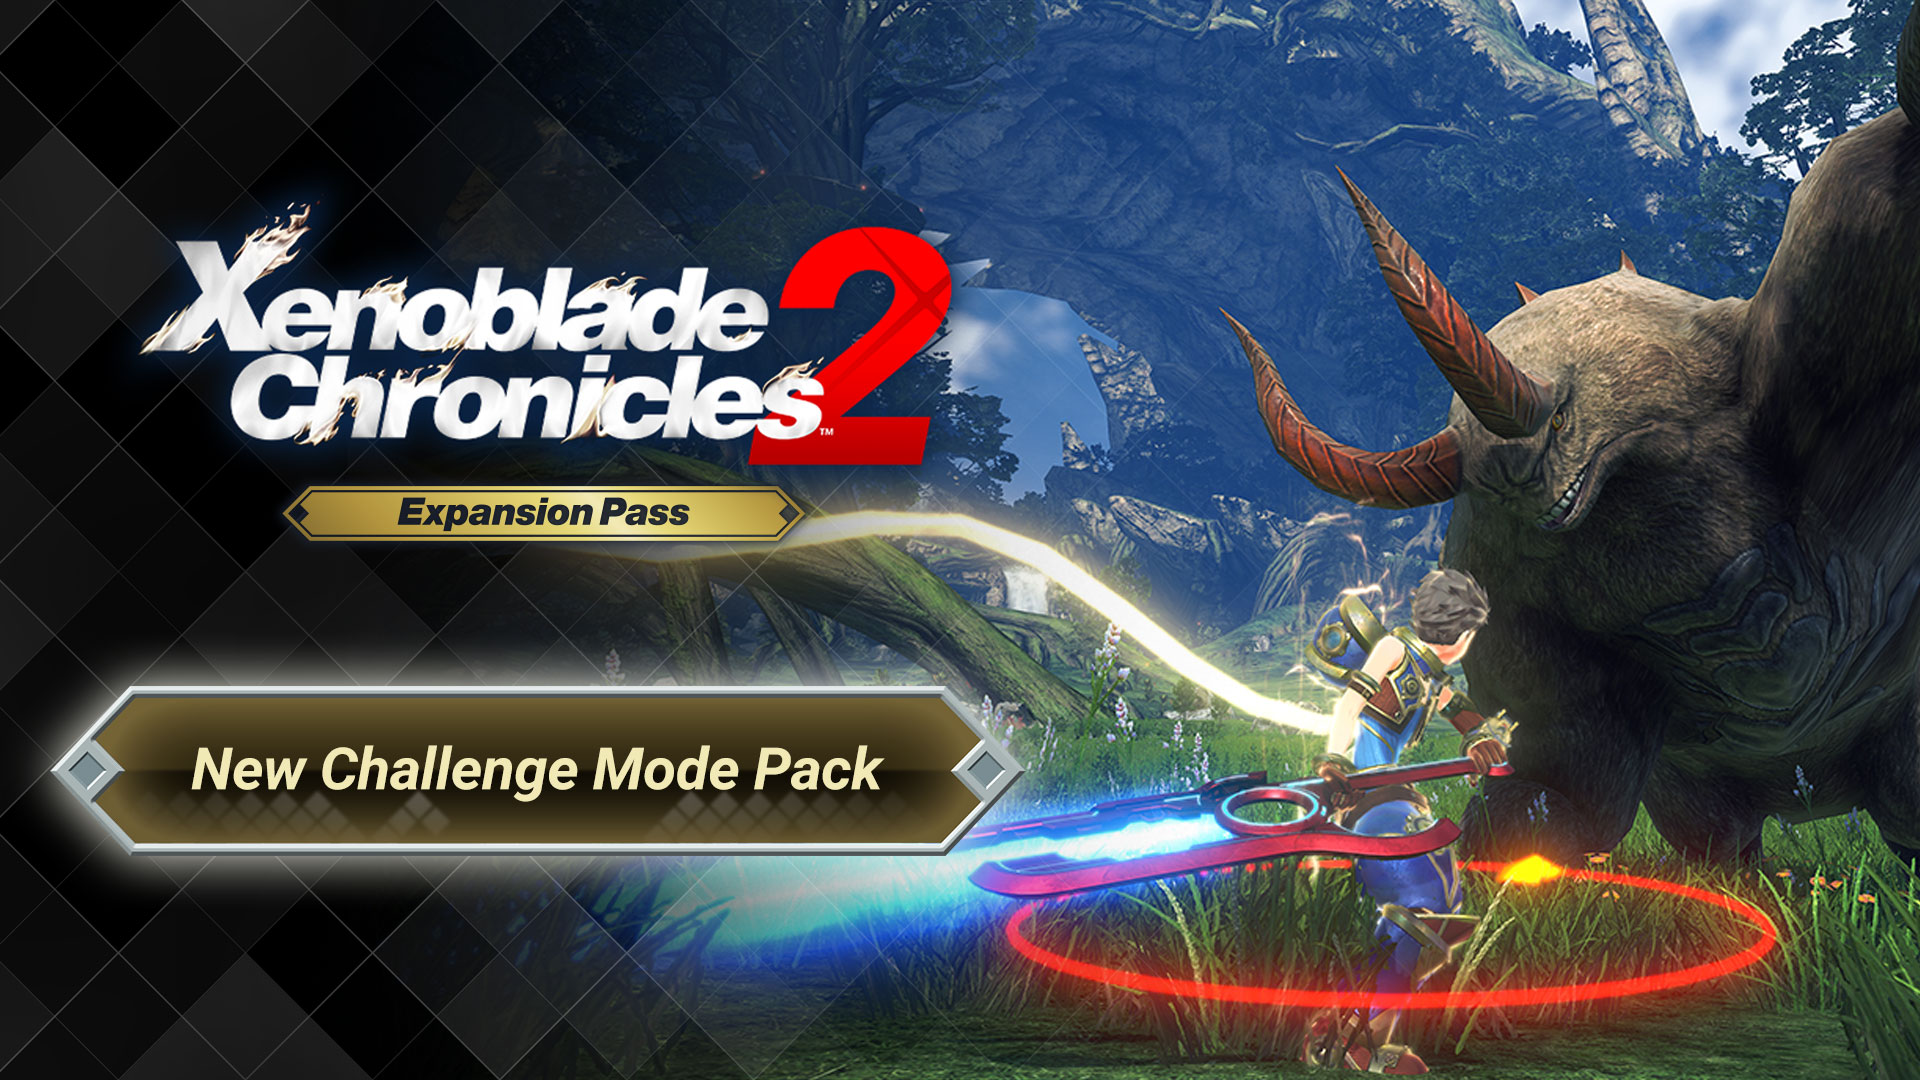 New Challenge Mode Pack